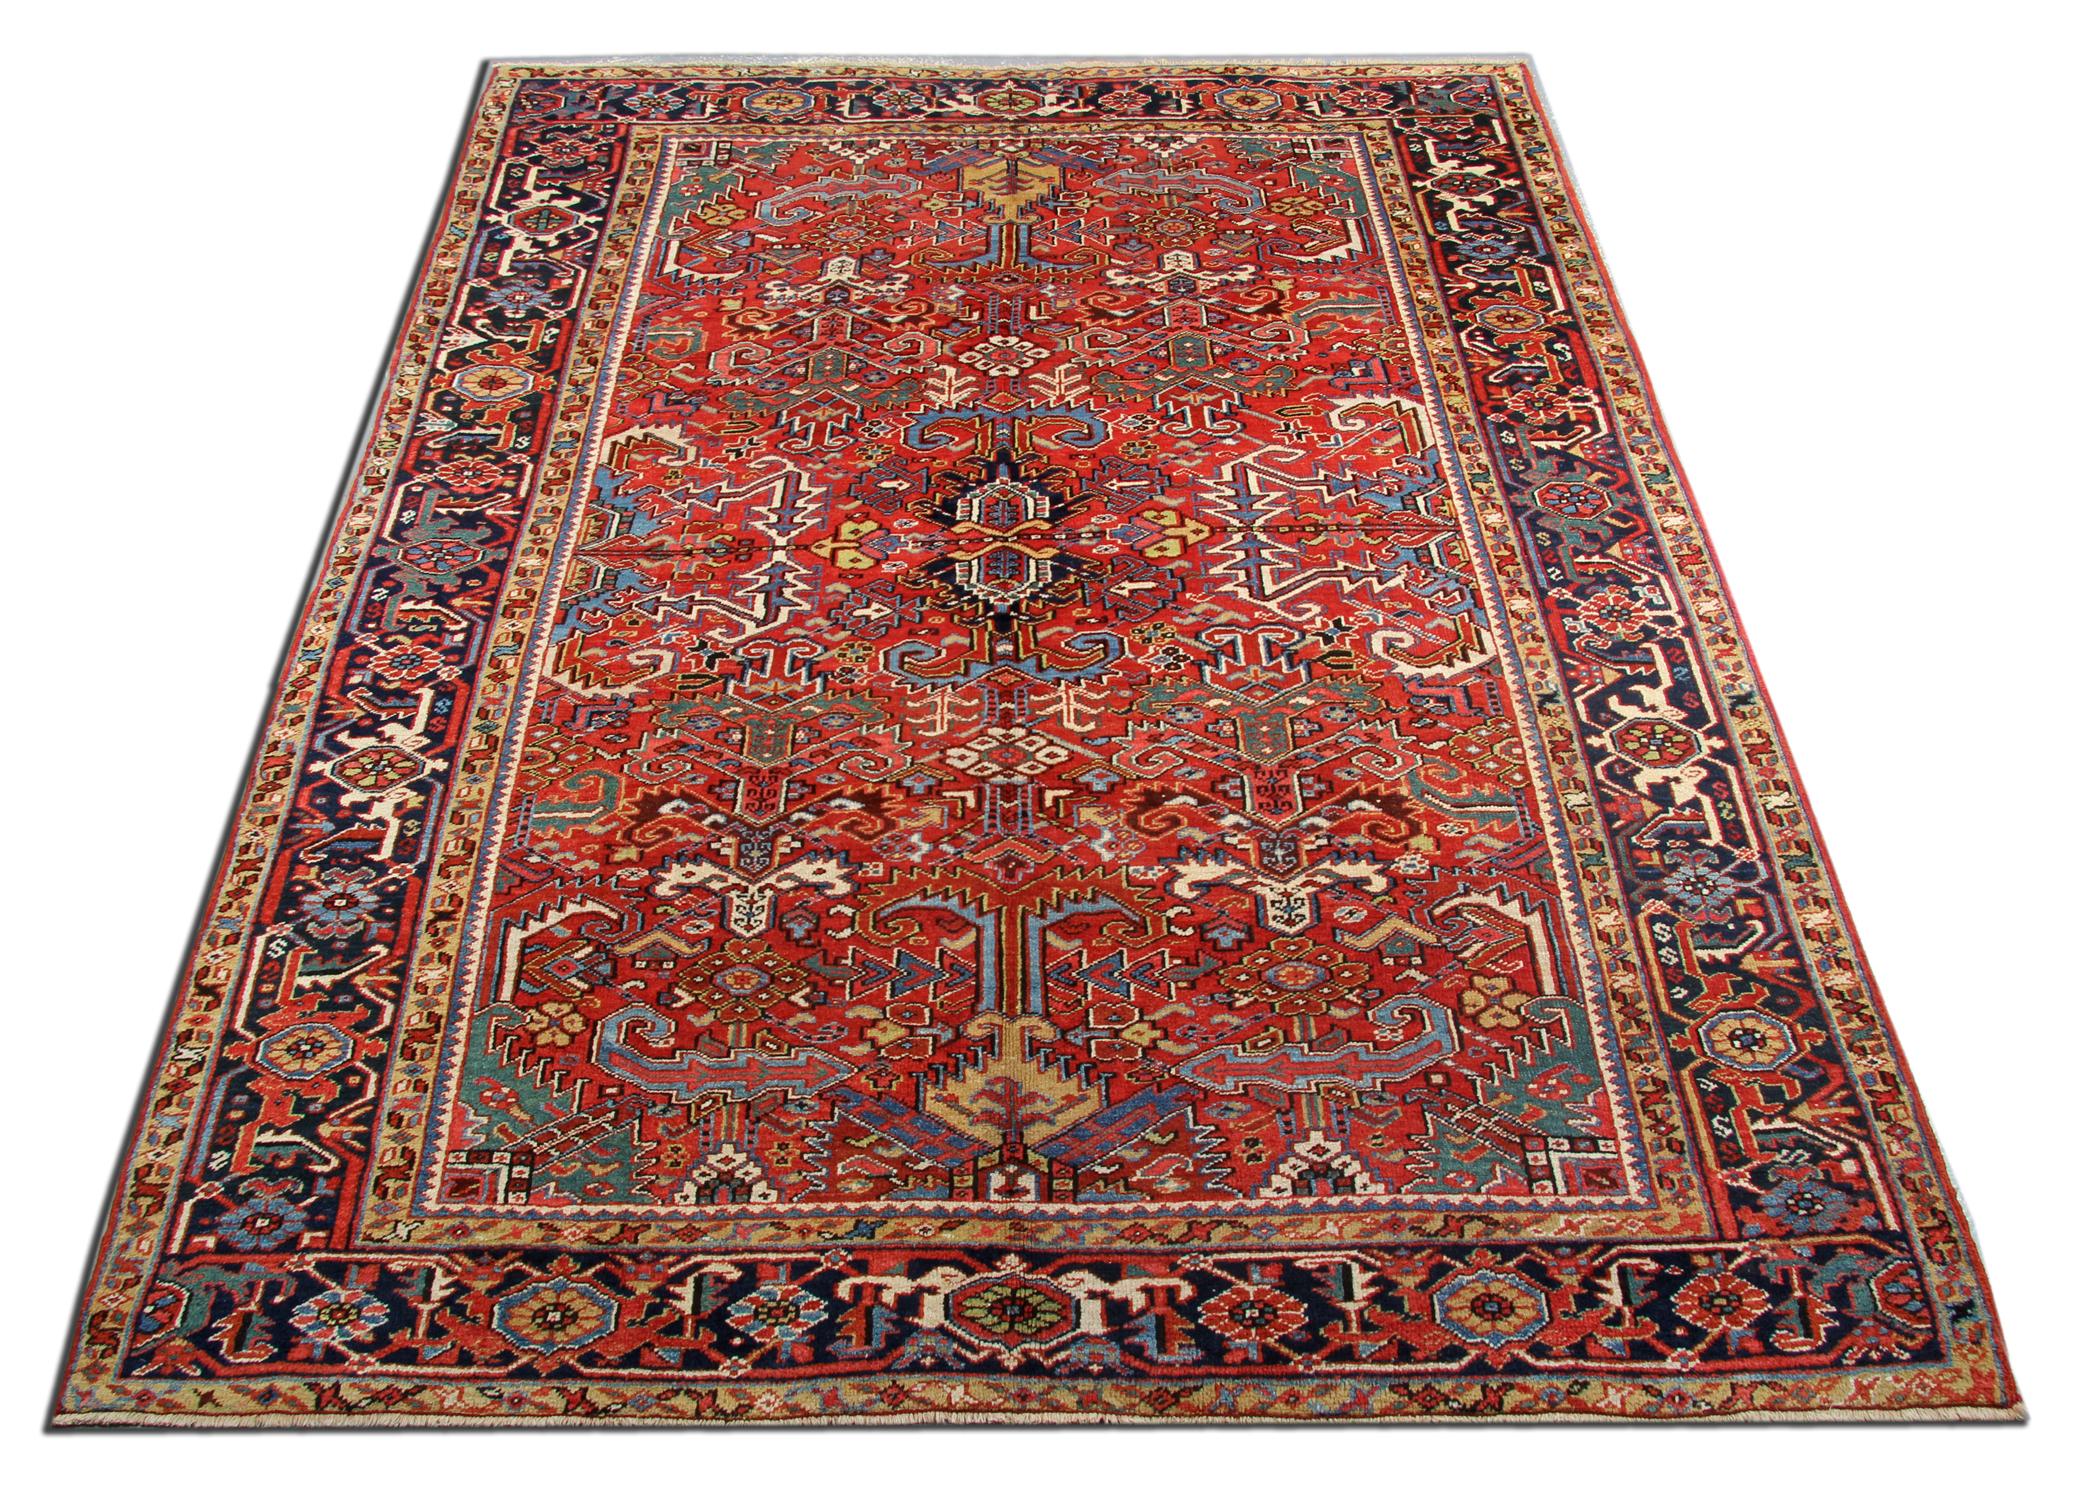 Looking to upgrade your floors with anantique rug? This piece is sure to wow your guests…
This fine wool rug was woven by hand in the 1910s and features a bold all over central design with a decorative enclosing border. Woven on a rich red